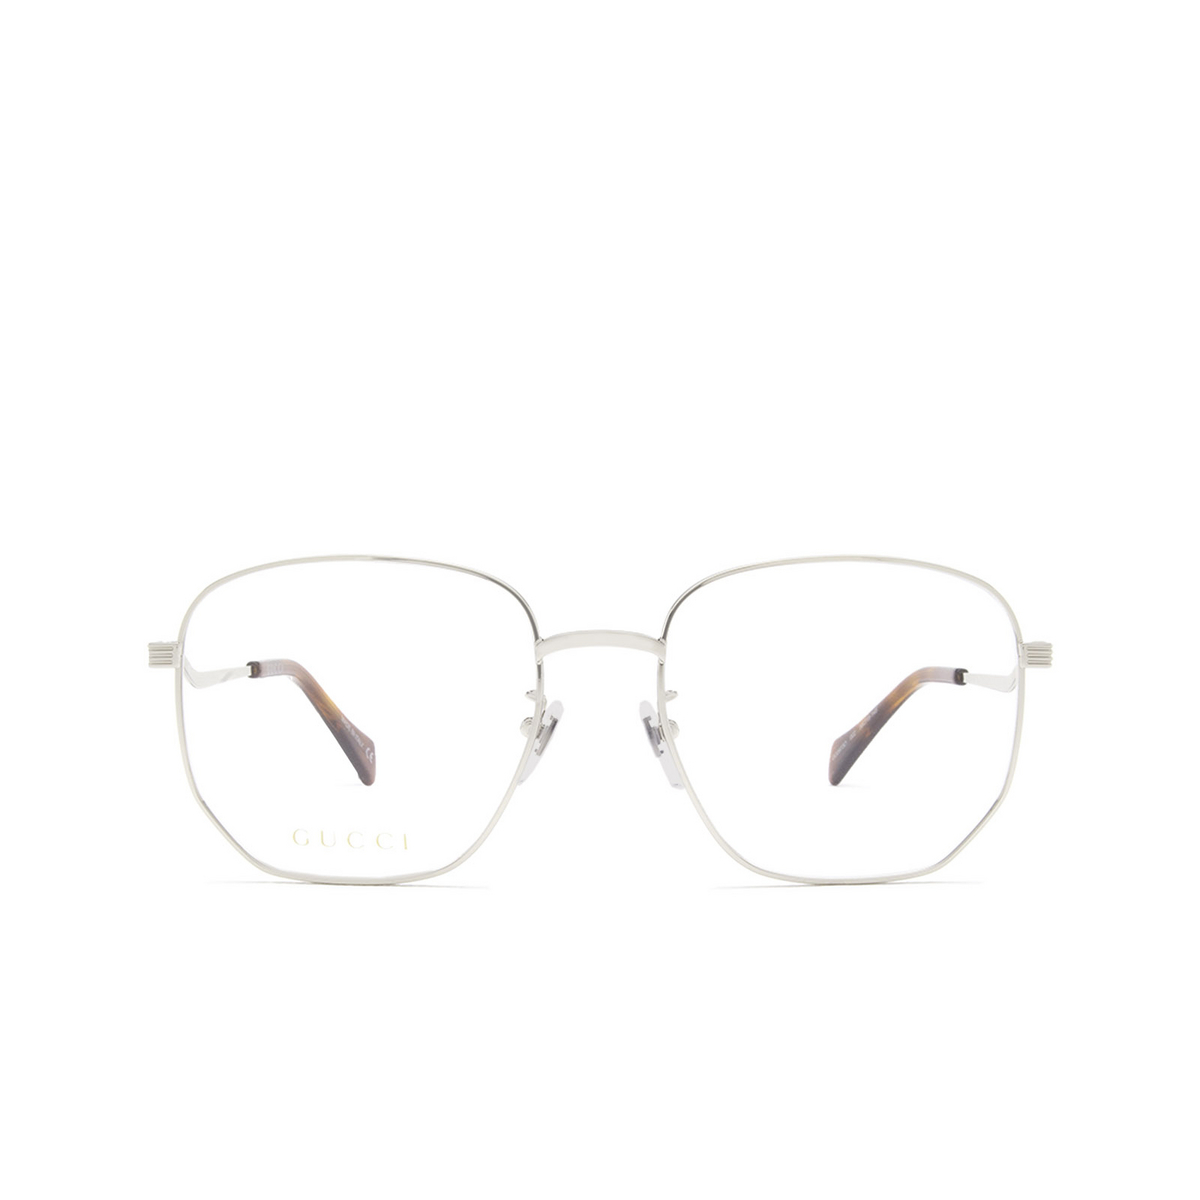 Gucci® Square Eyeglasses: GG0973O color 002 Silver - front view